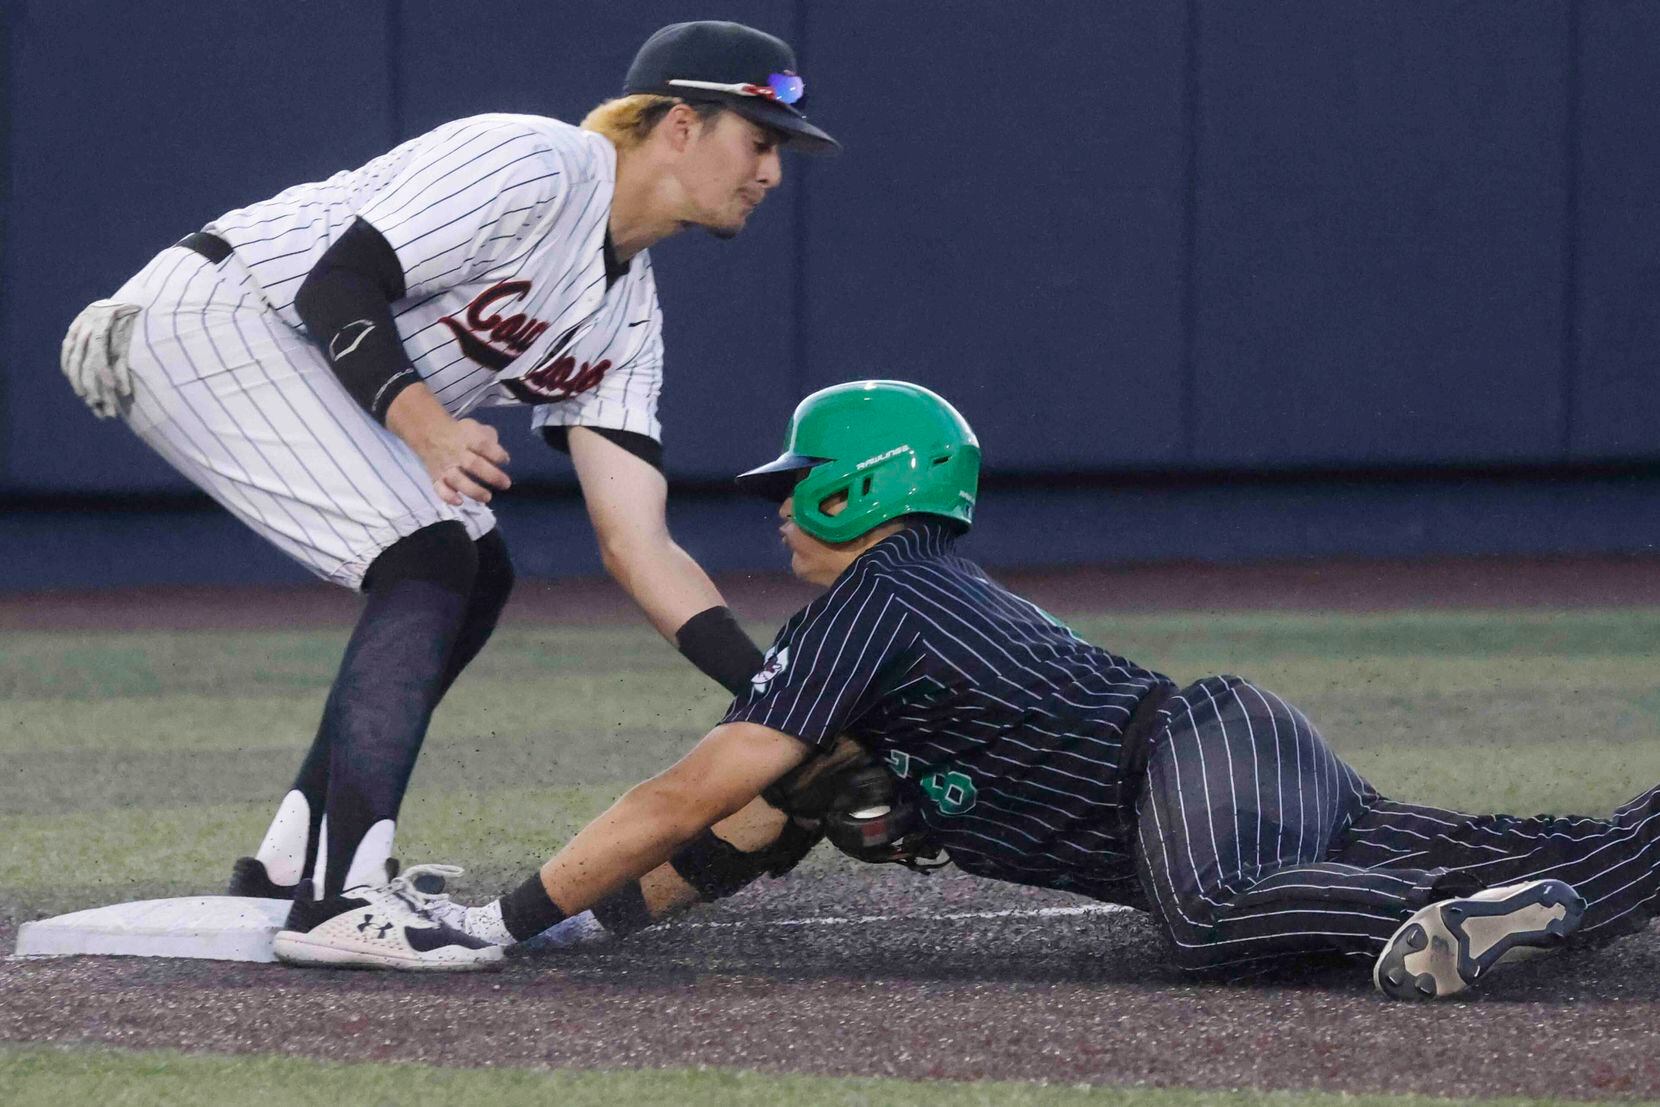 Southlake Carroll’s Ben Tryon, right, misses to touch the fourth plate past Coppell’s Tanner...